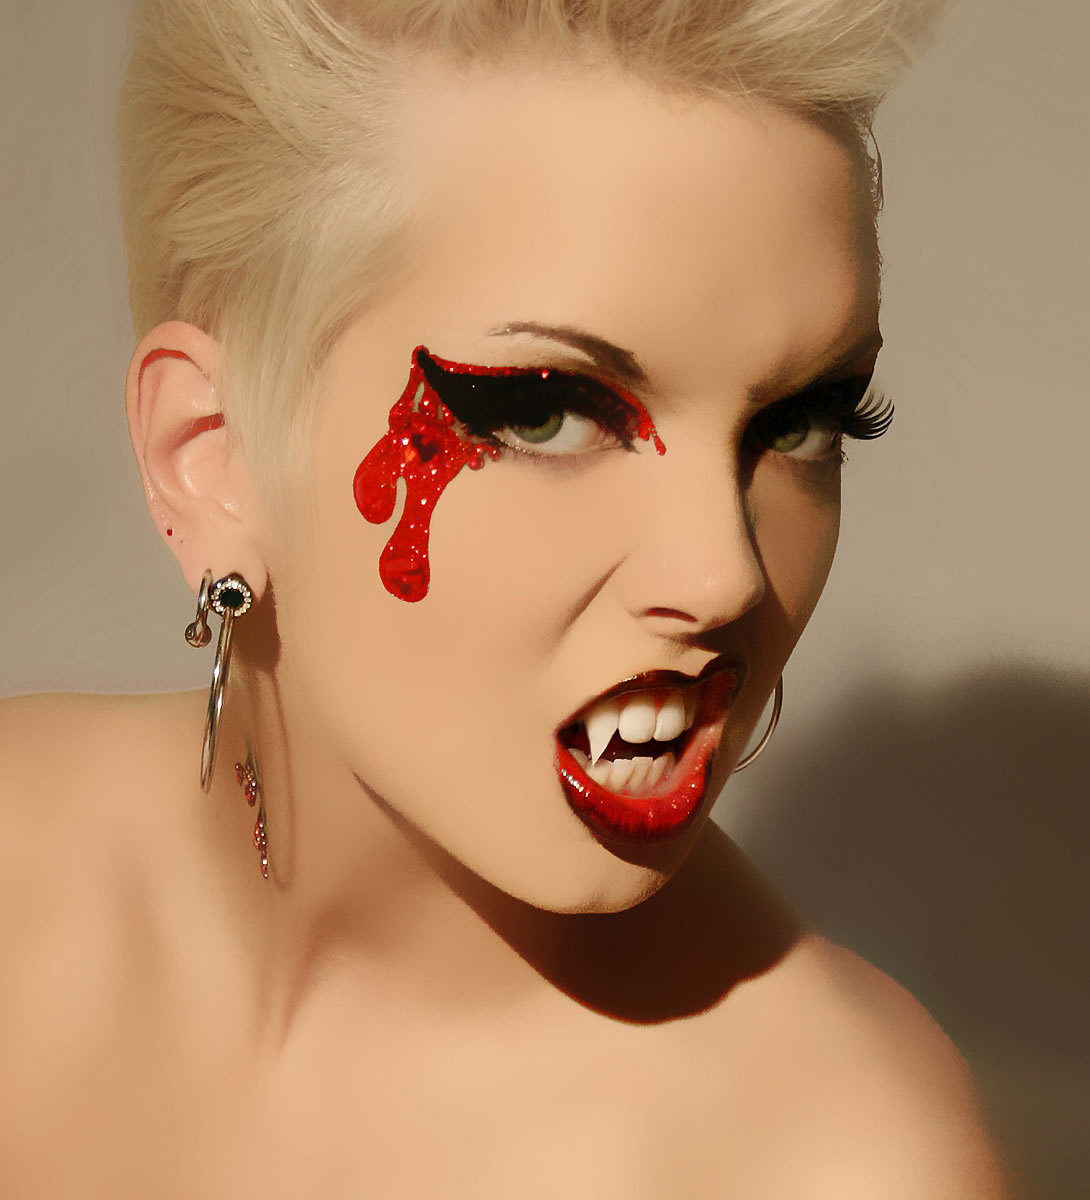 Girl with makeup for halloween vampire with fangs